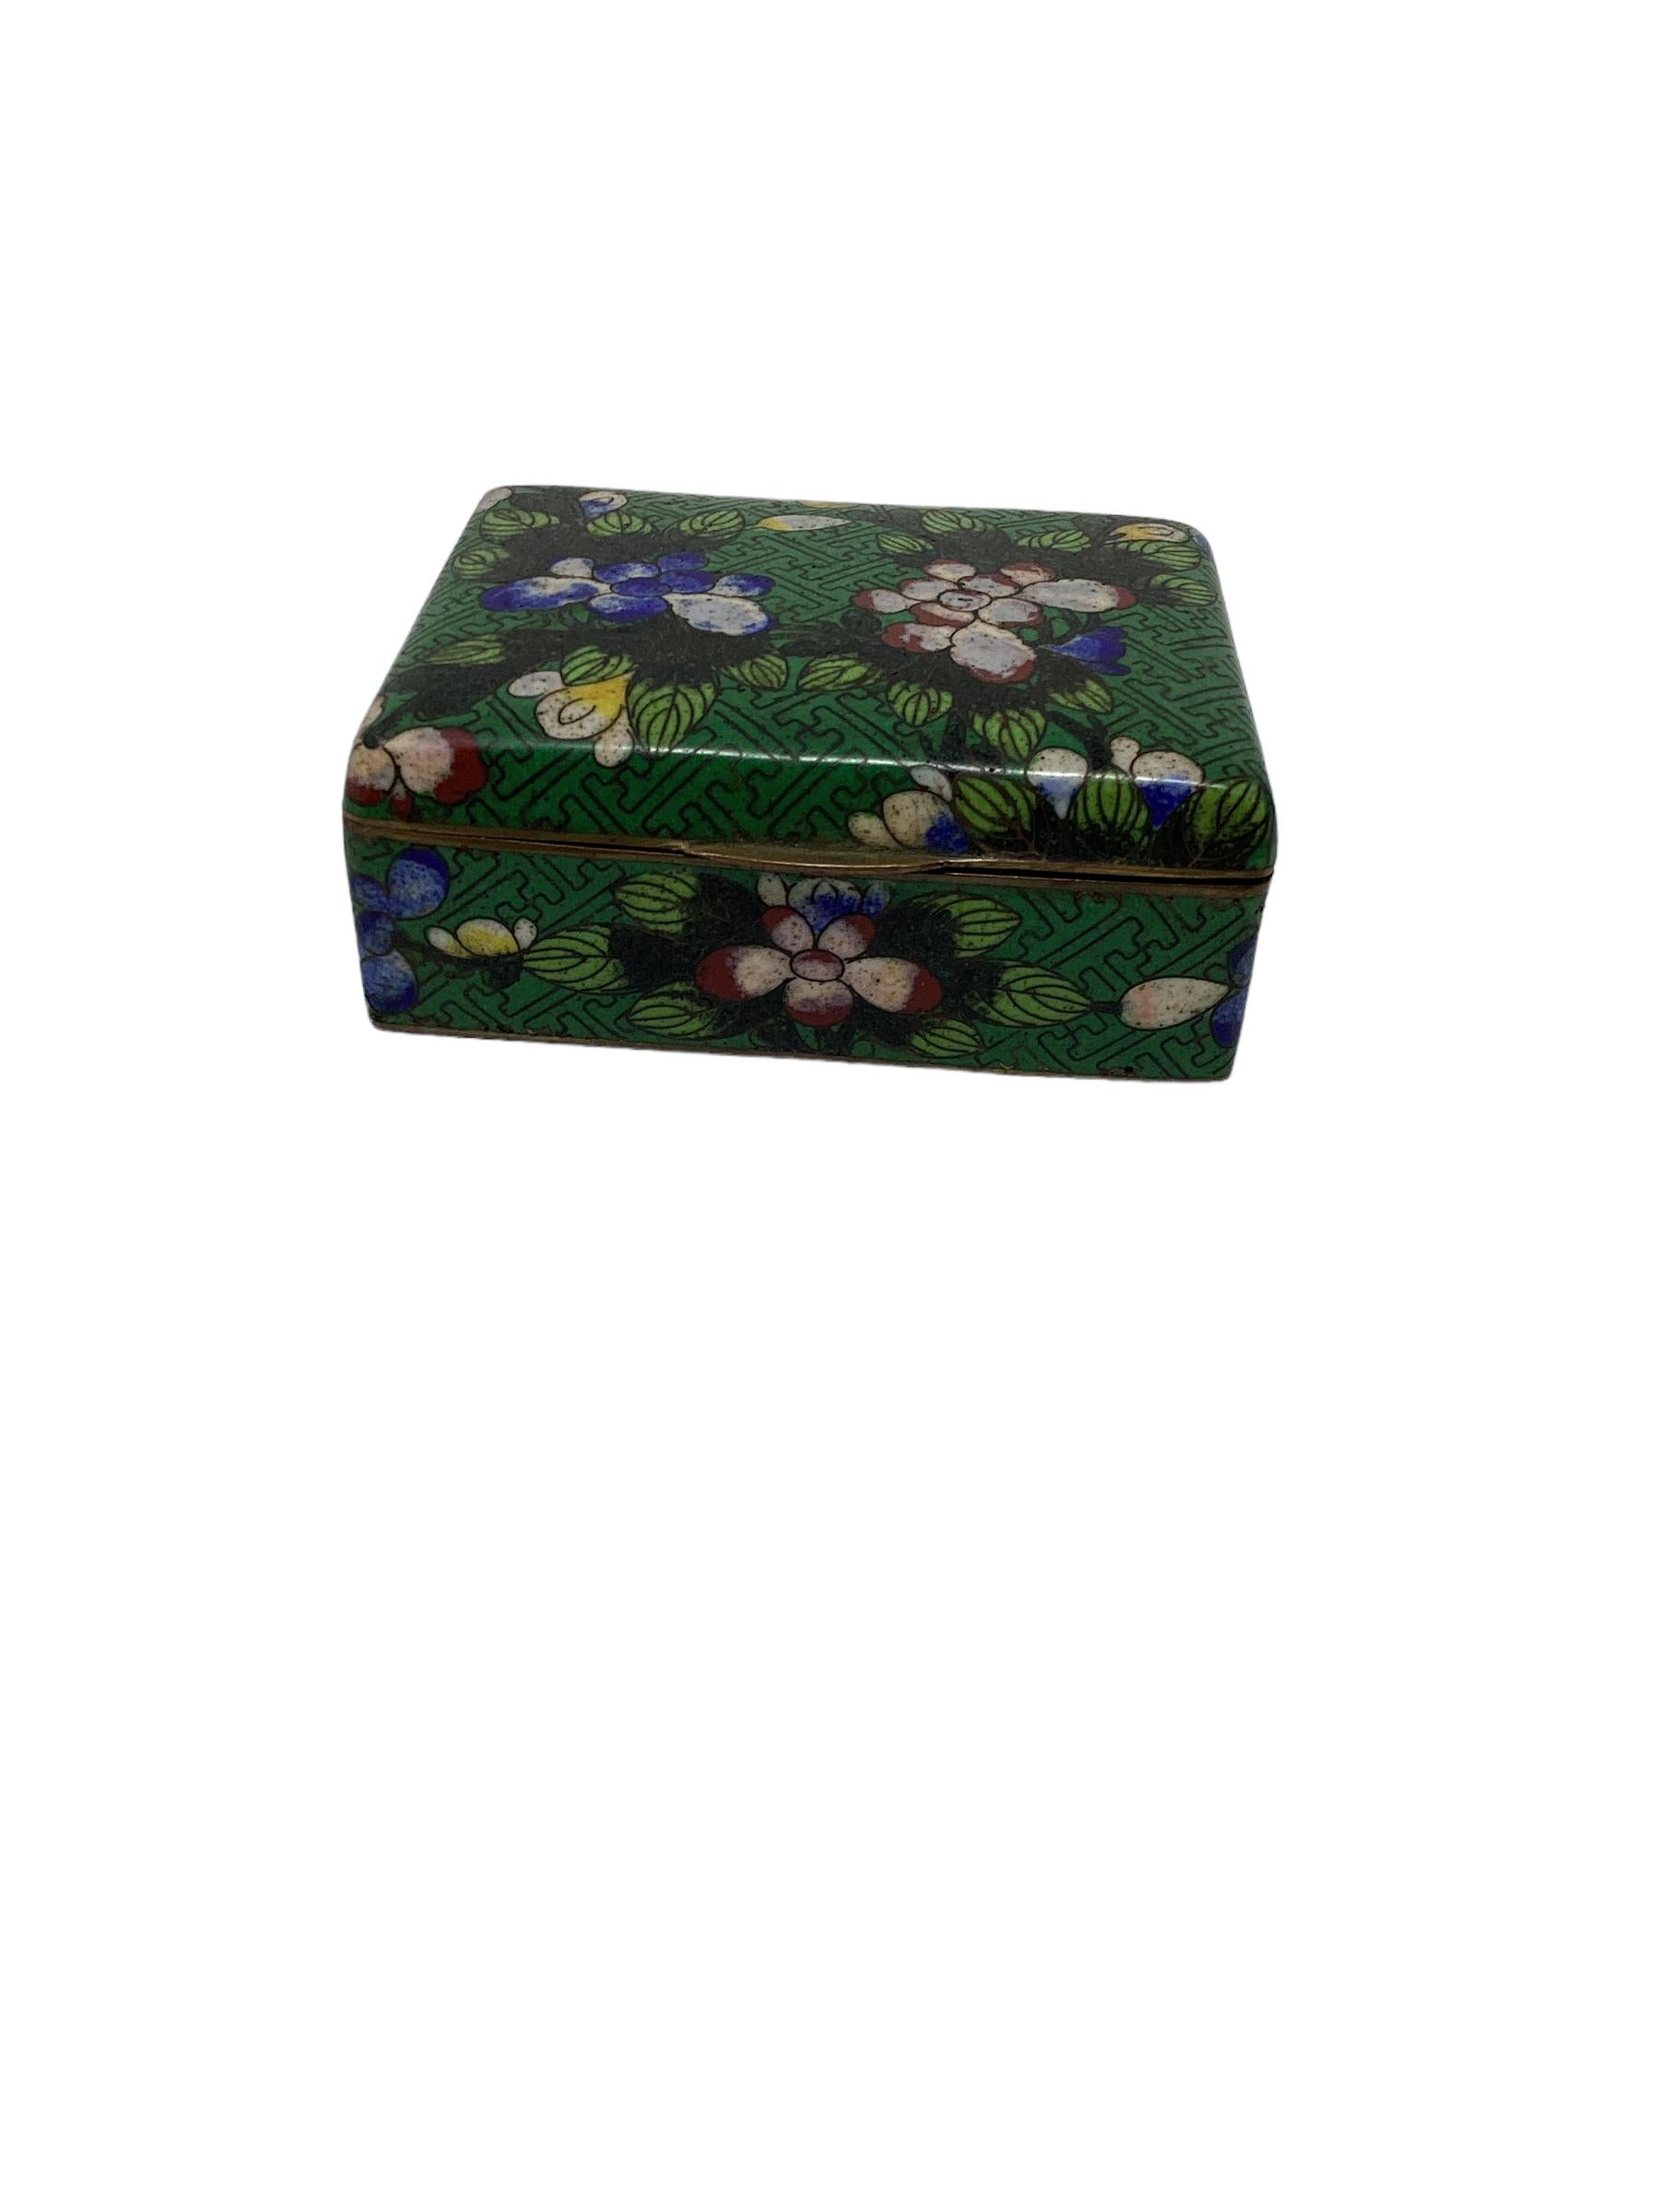 Lovely Chinese export cloisonné box made of brass and enameled with a beautiful floral pattern on a green background. This decorative box was most likely a cigarette box or trinket box and would make a great desk accessory or cocktail table